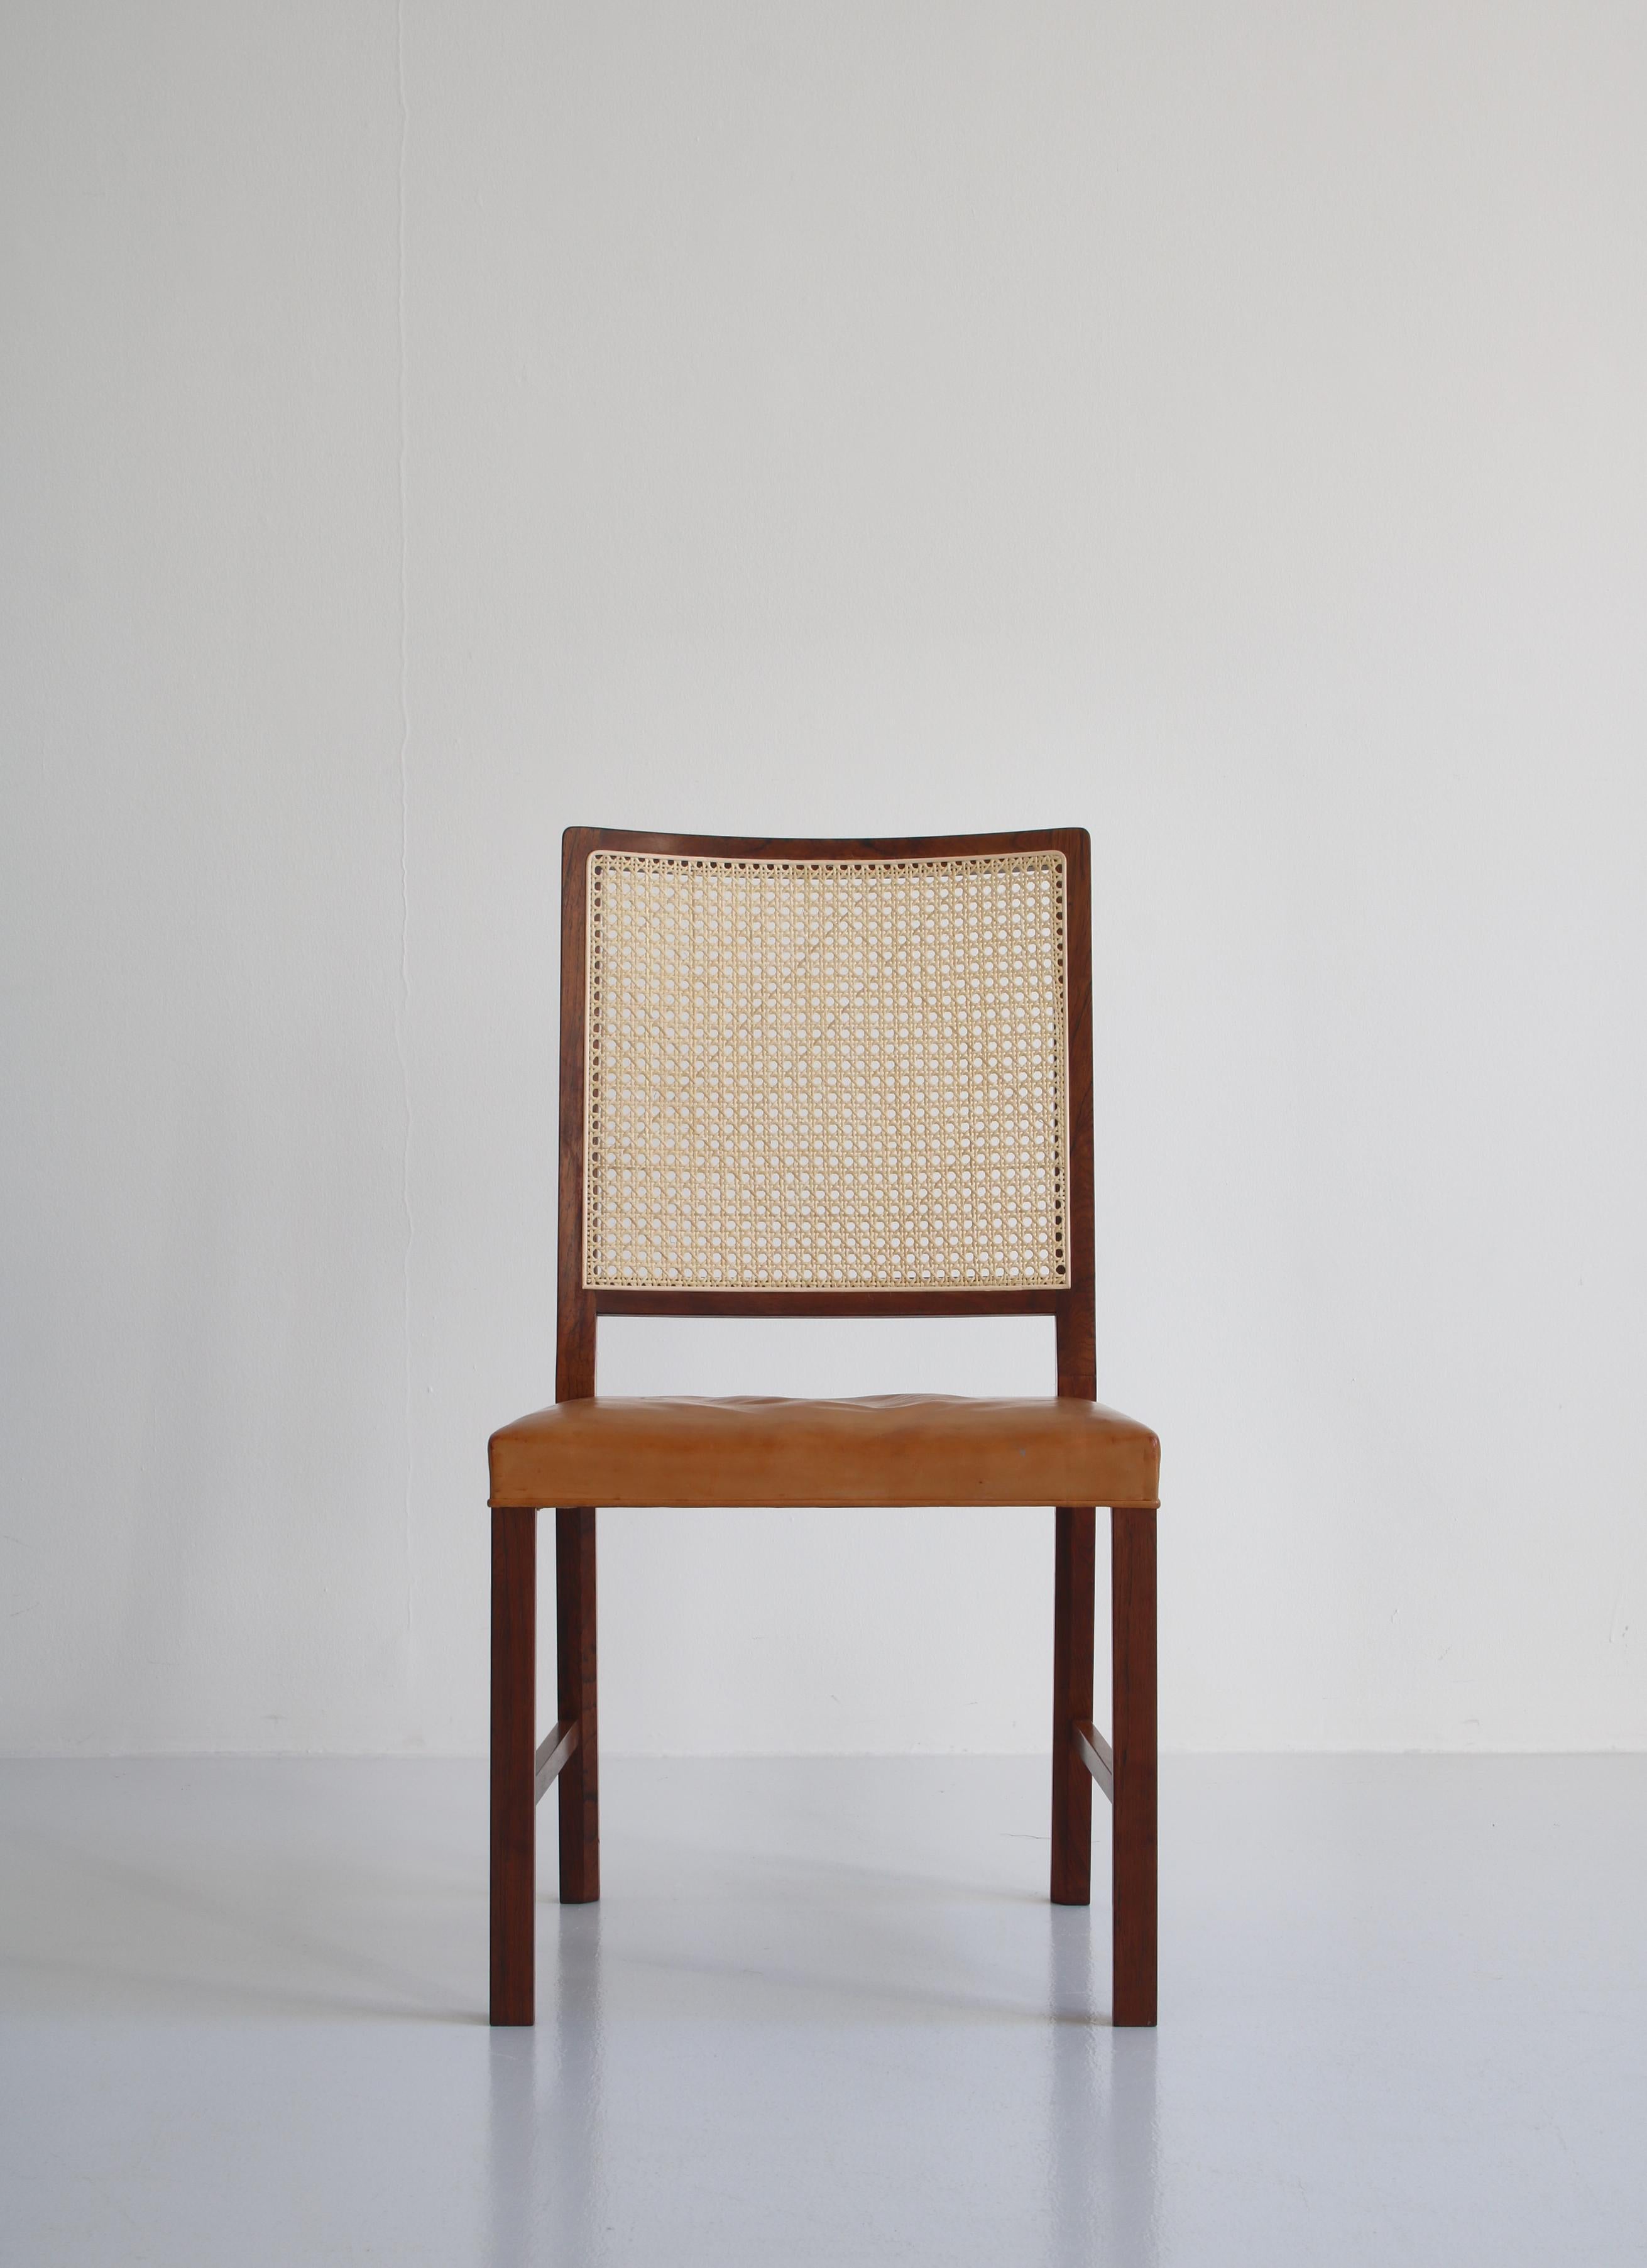 Scandinavian Modern Danish Modern Side Chair in Rosewood and Leather by Bernt Petersen, 1960s